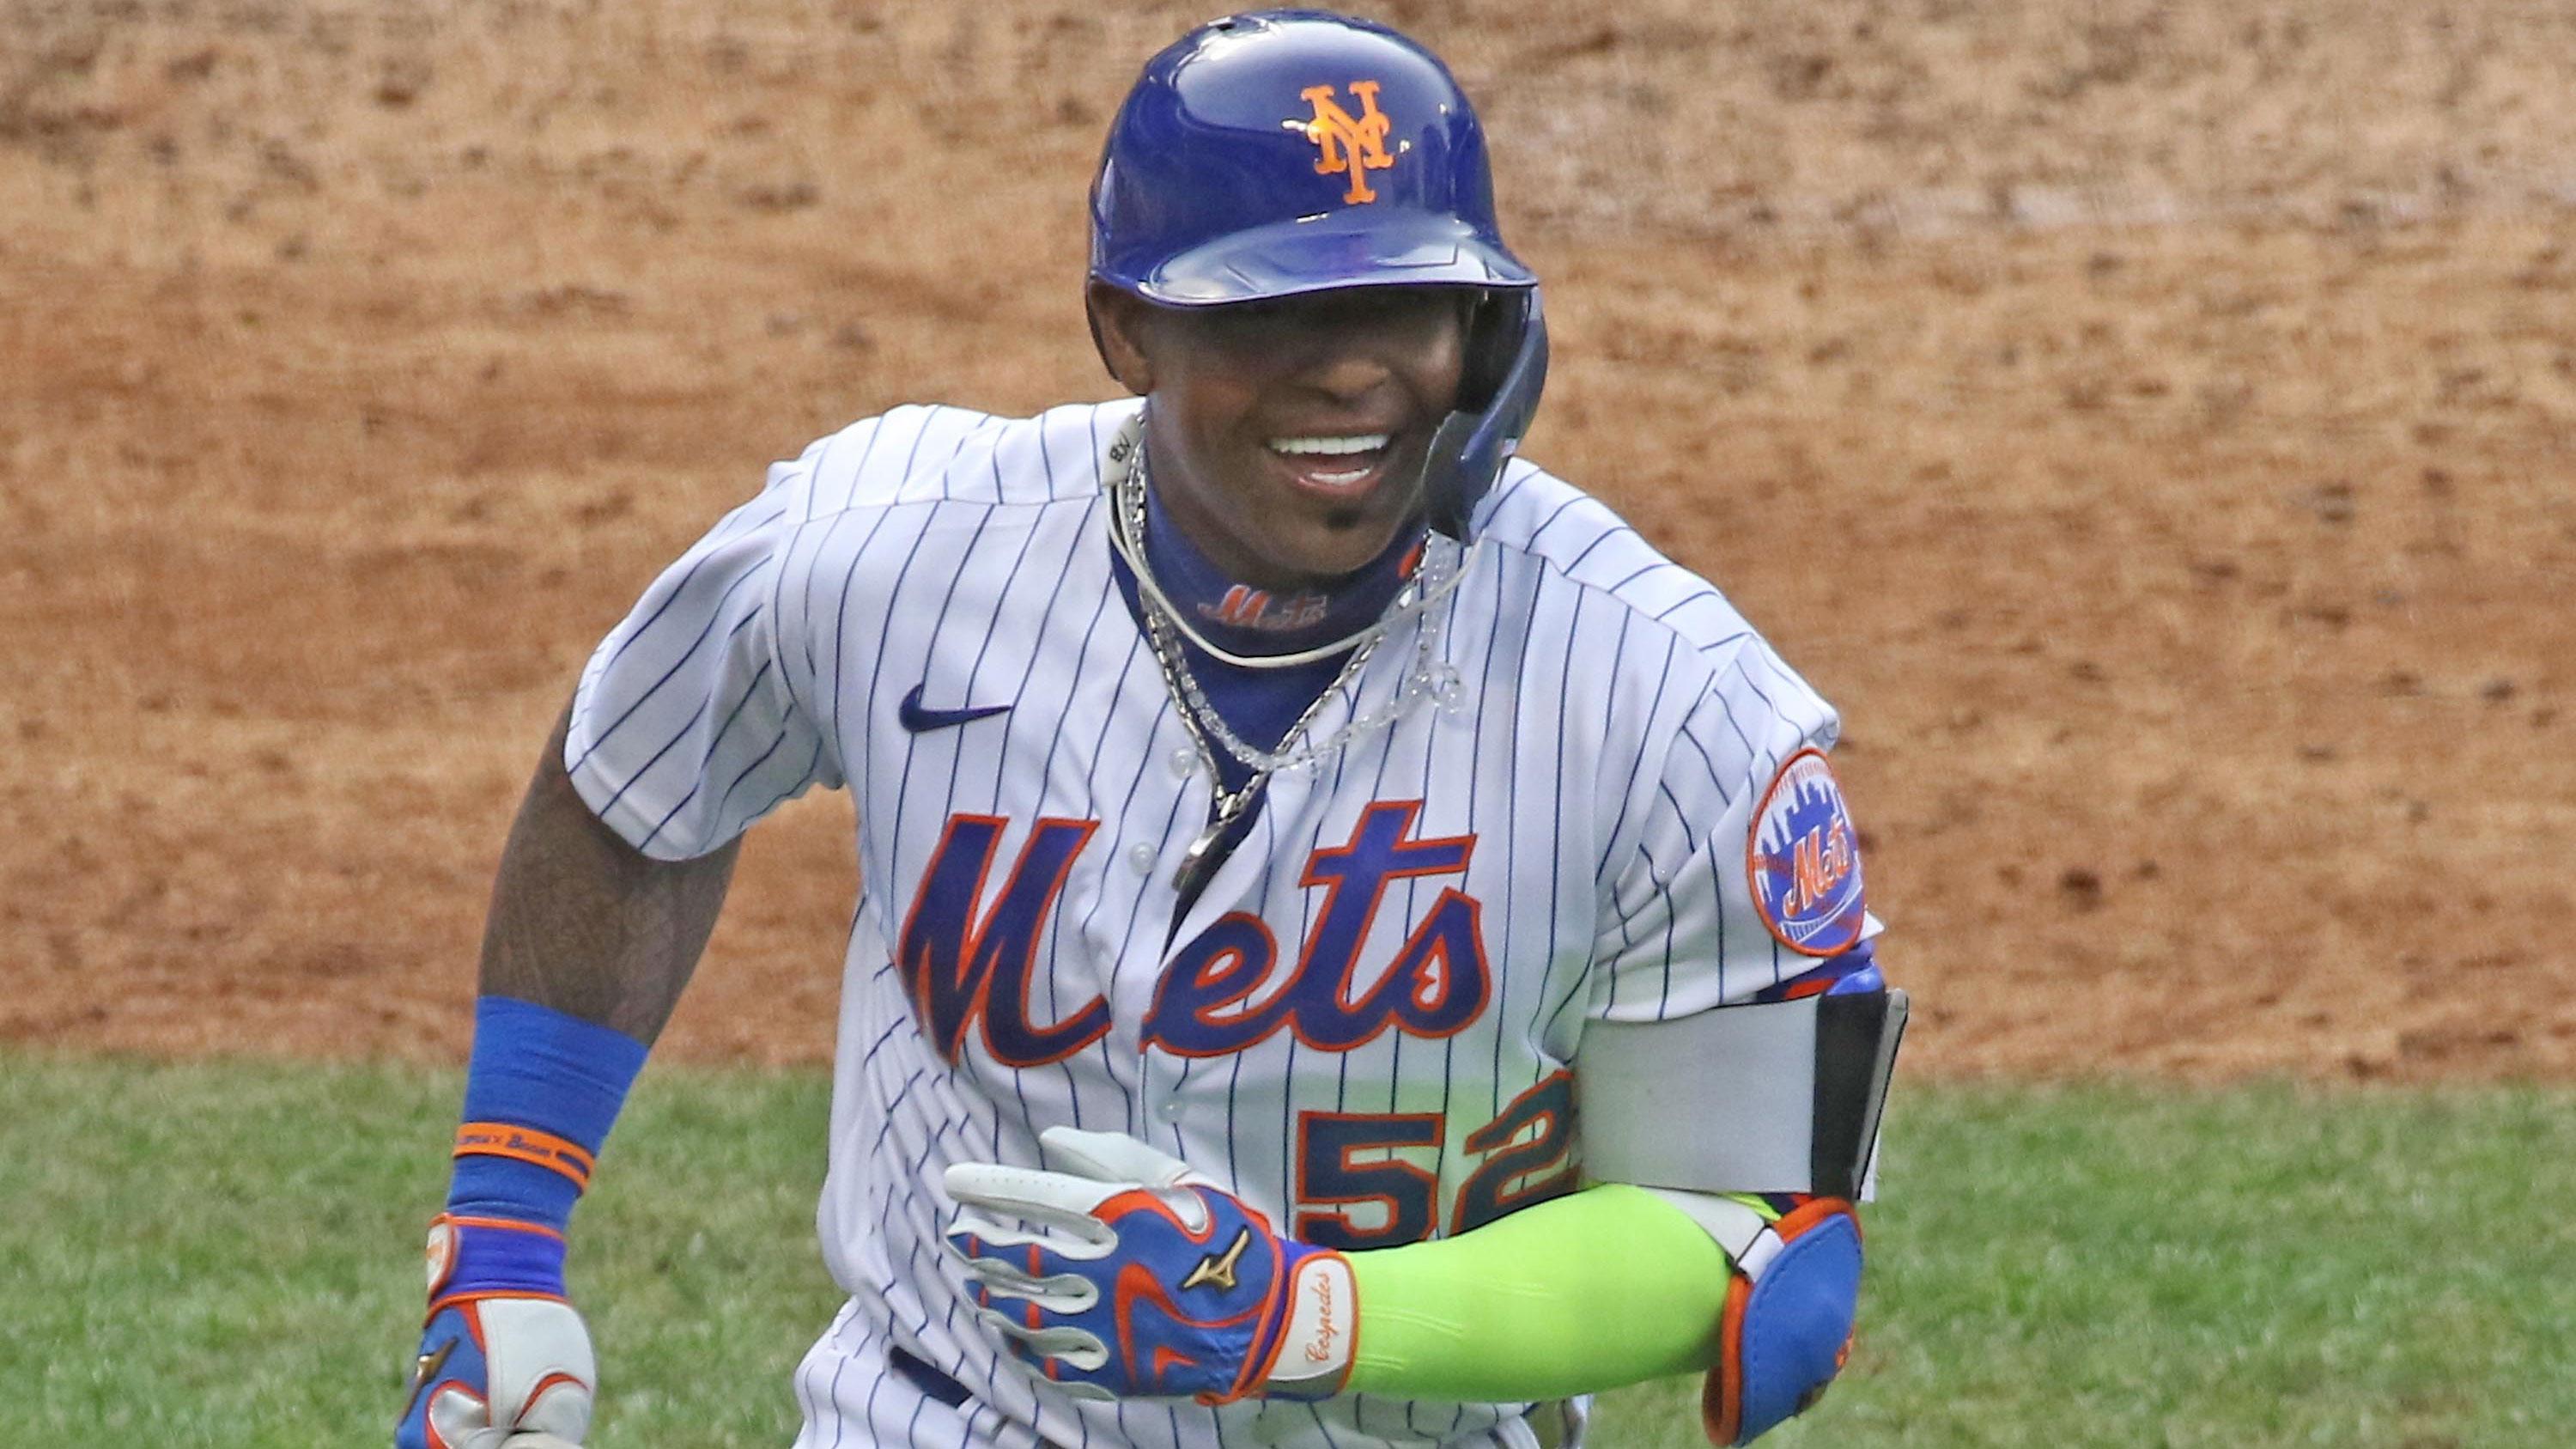 Yoenis Cespedes after he hit a home run in the seventh inning as the Atlanta Braves play the NY Mets on Opening Day at Citi Field in Queens, NY on July 24, 2020. The Atlanta Braves Play The Ny Mets On Opening Day At Citi Field In Queens Ny On July 24 2020 / © Chris Pedota, NorthJersey.com via Imagn Content Services, LLC